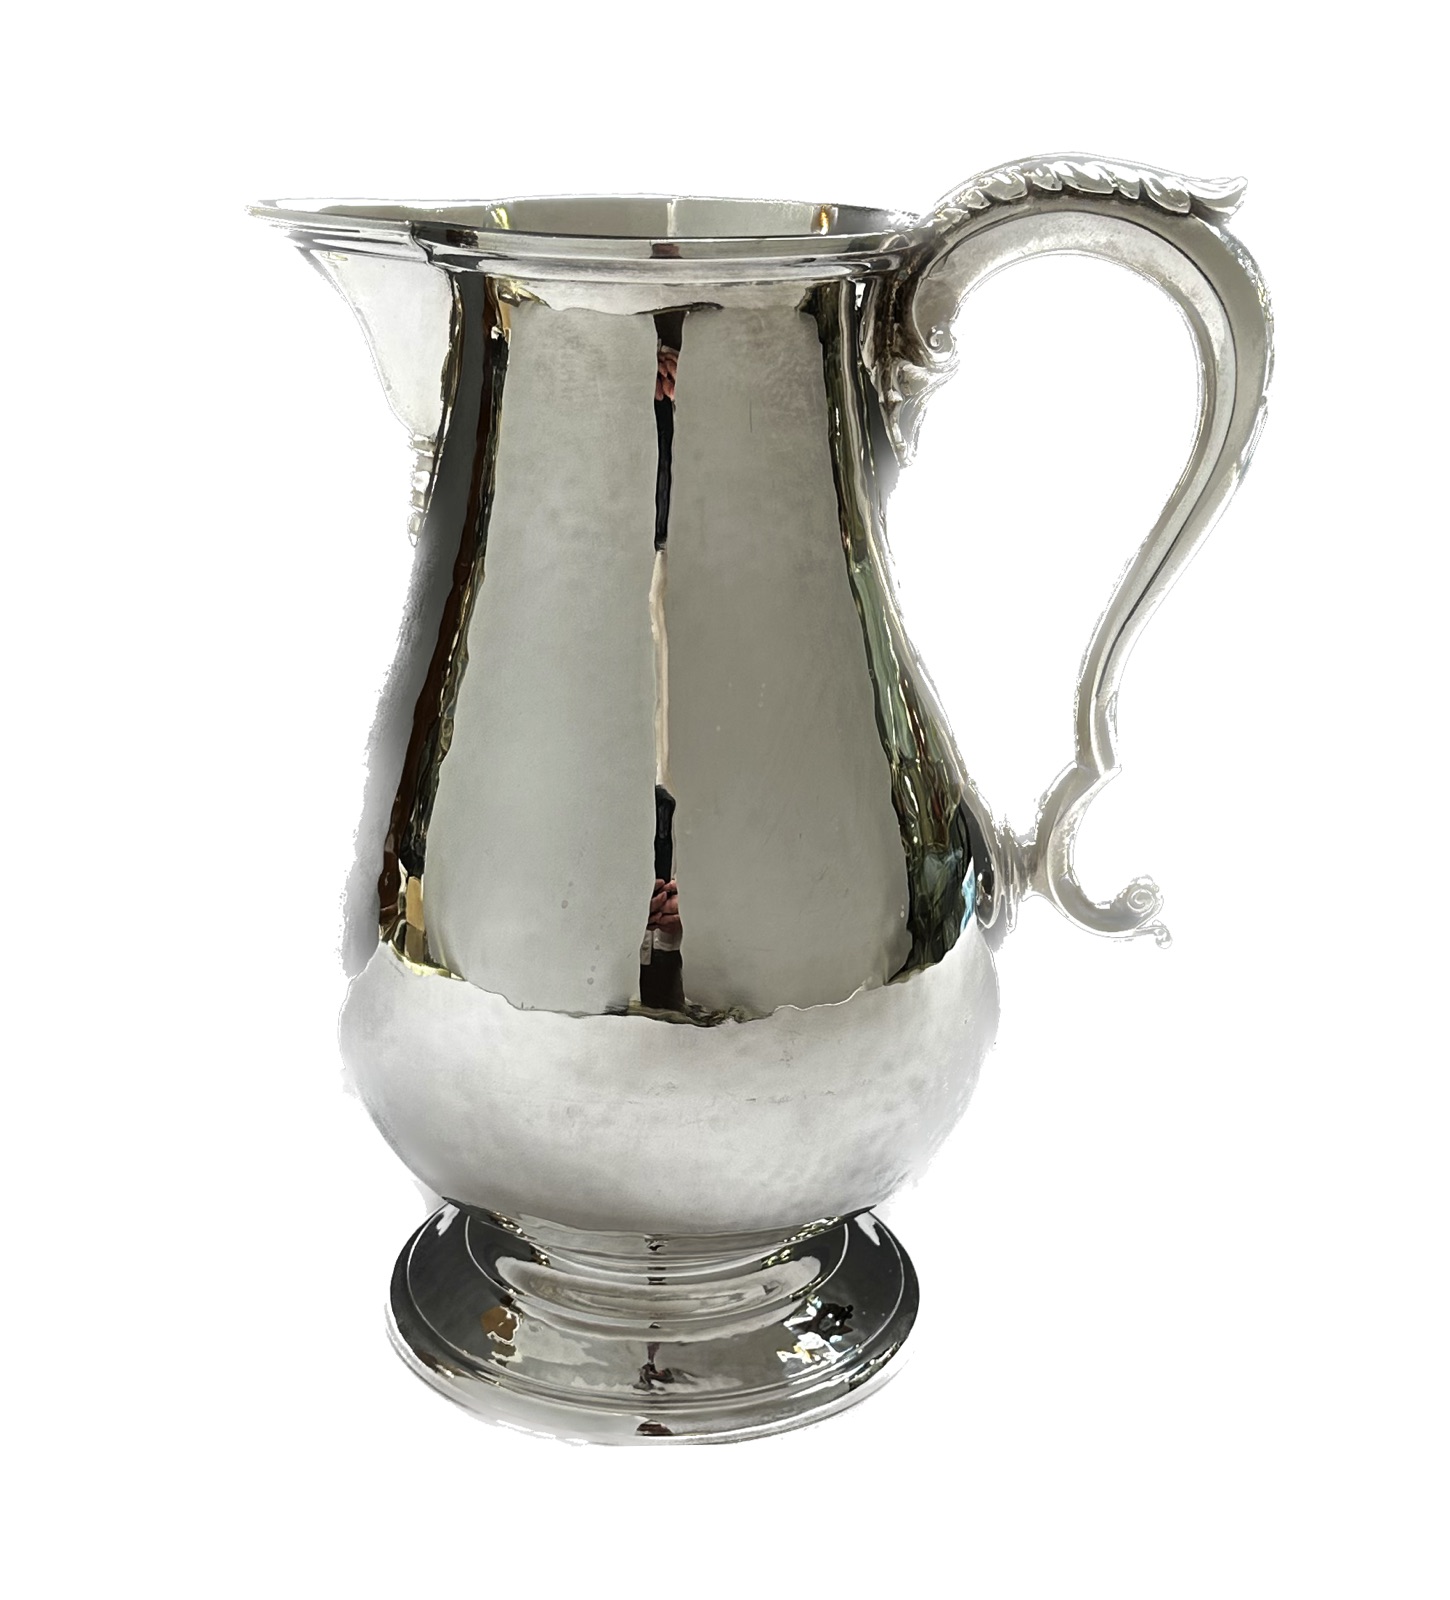 Antique Ornate Brass and Silver Pitcher Metal Jug -  Canada